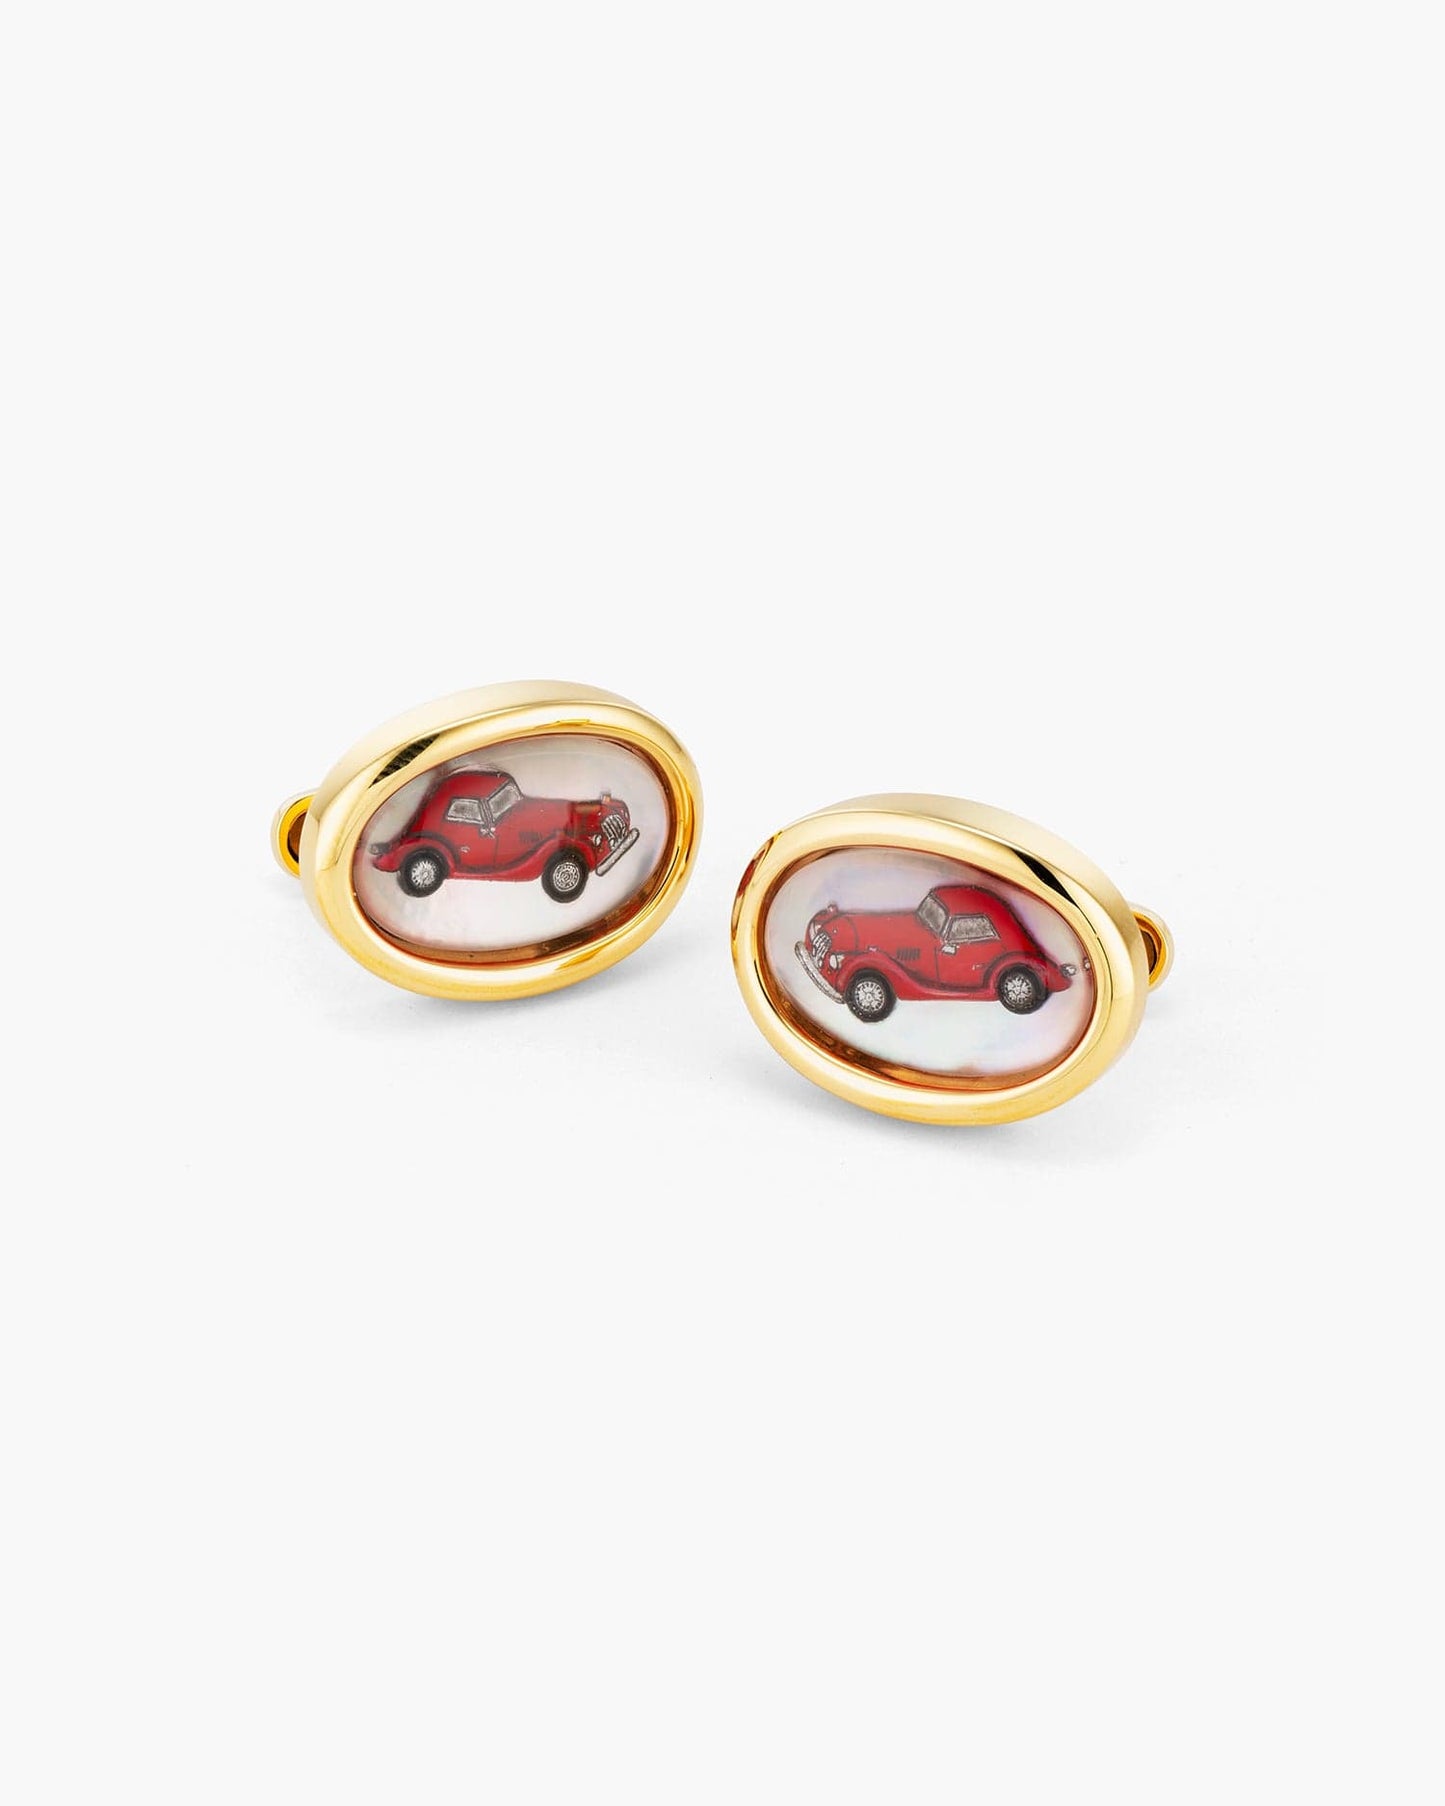 Mother of Pearl and Crystal Hand Painted Hardtop Red Car Cufflinks